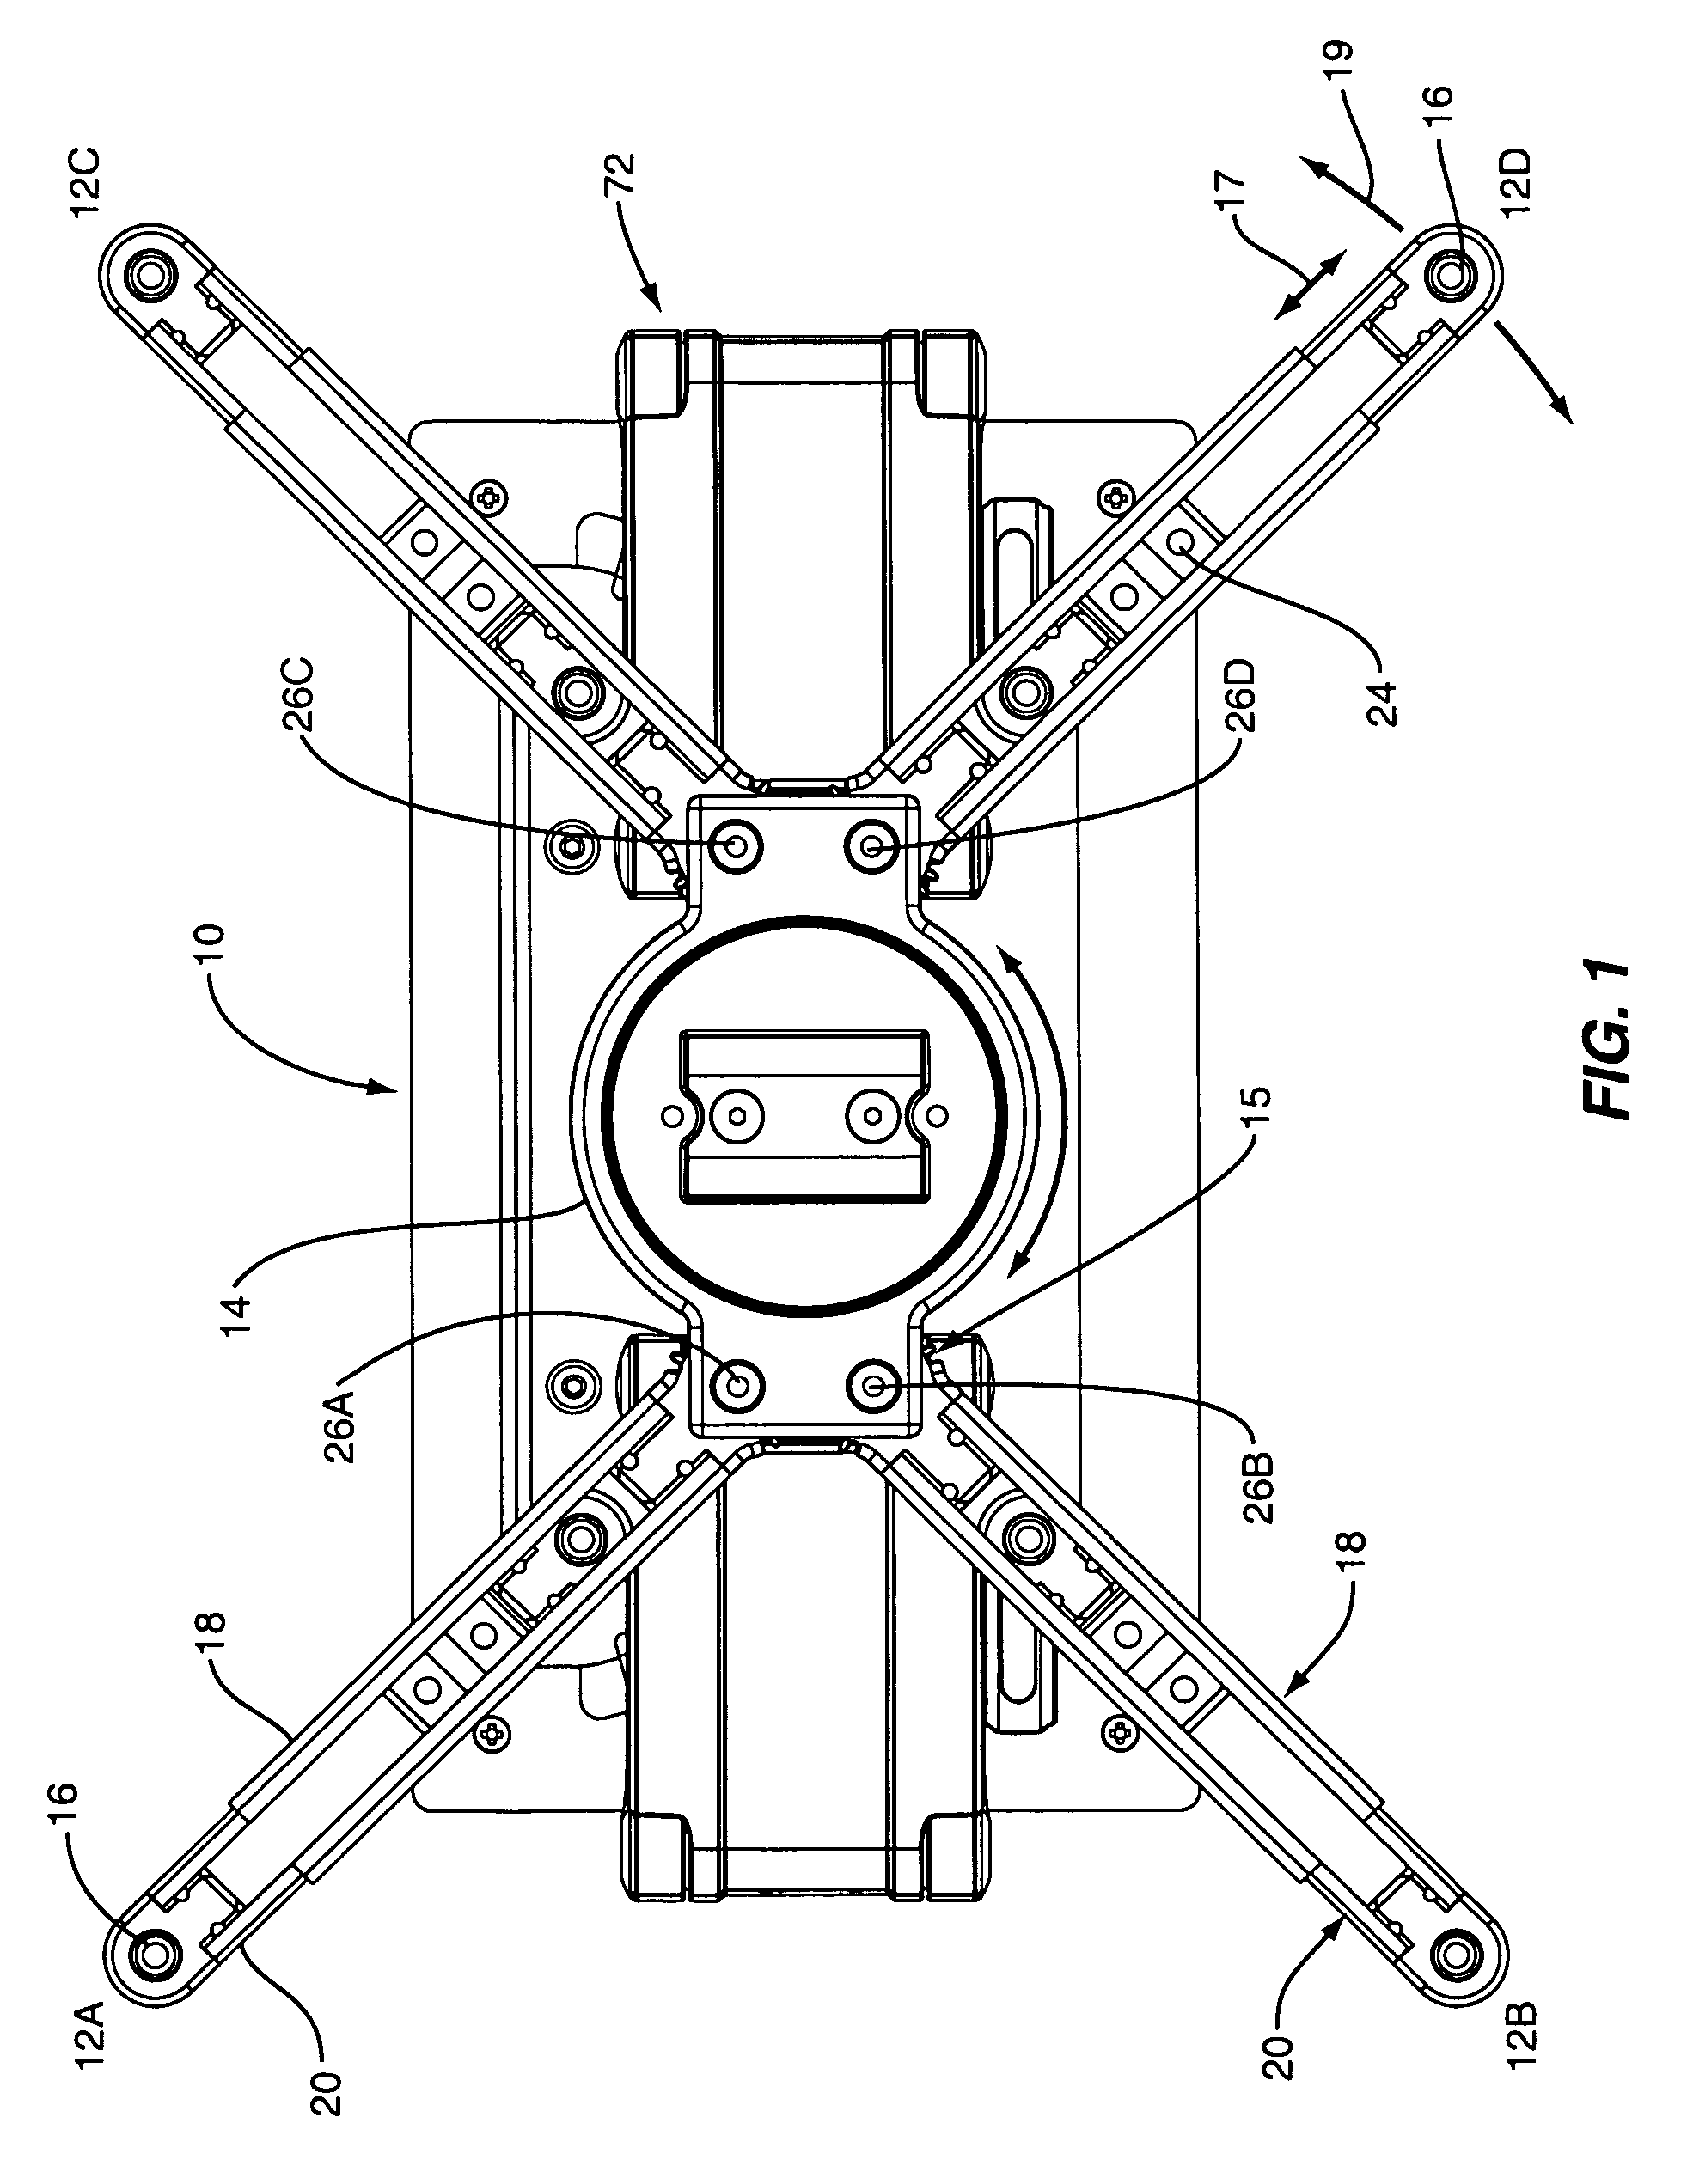 Universal mounting system for a flat panel display